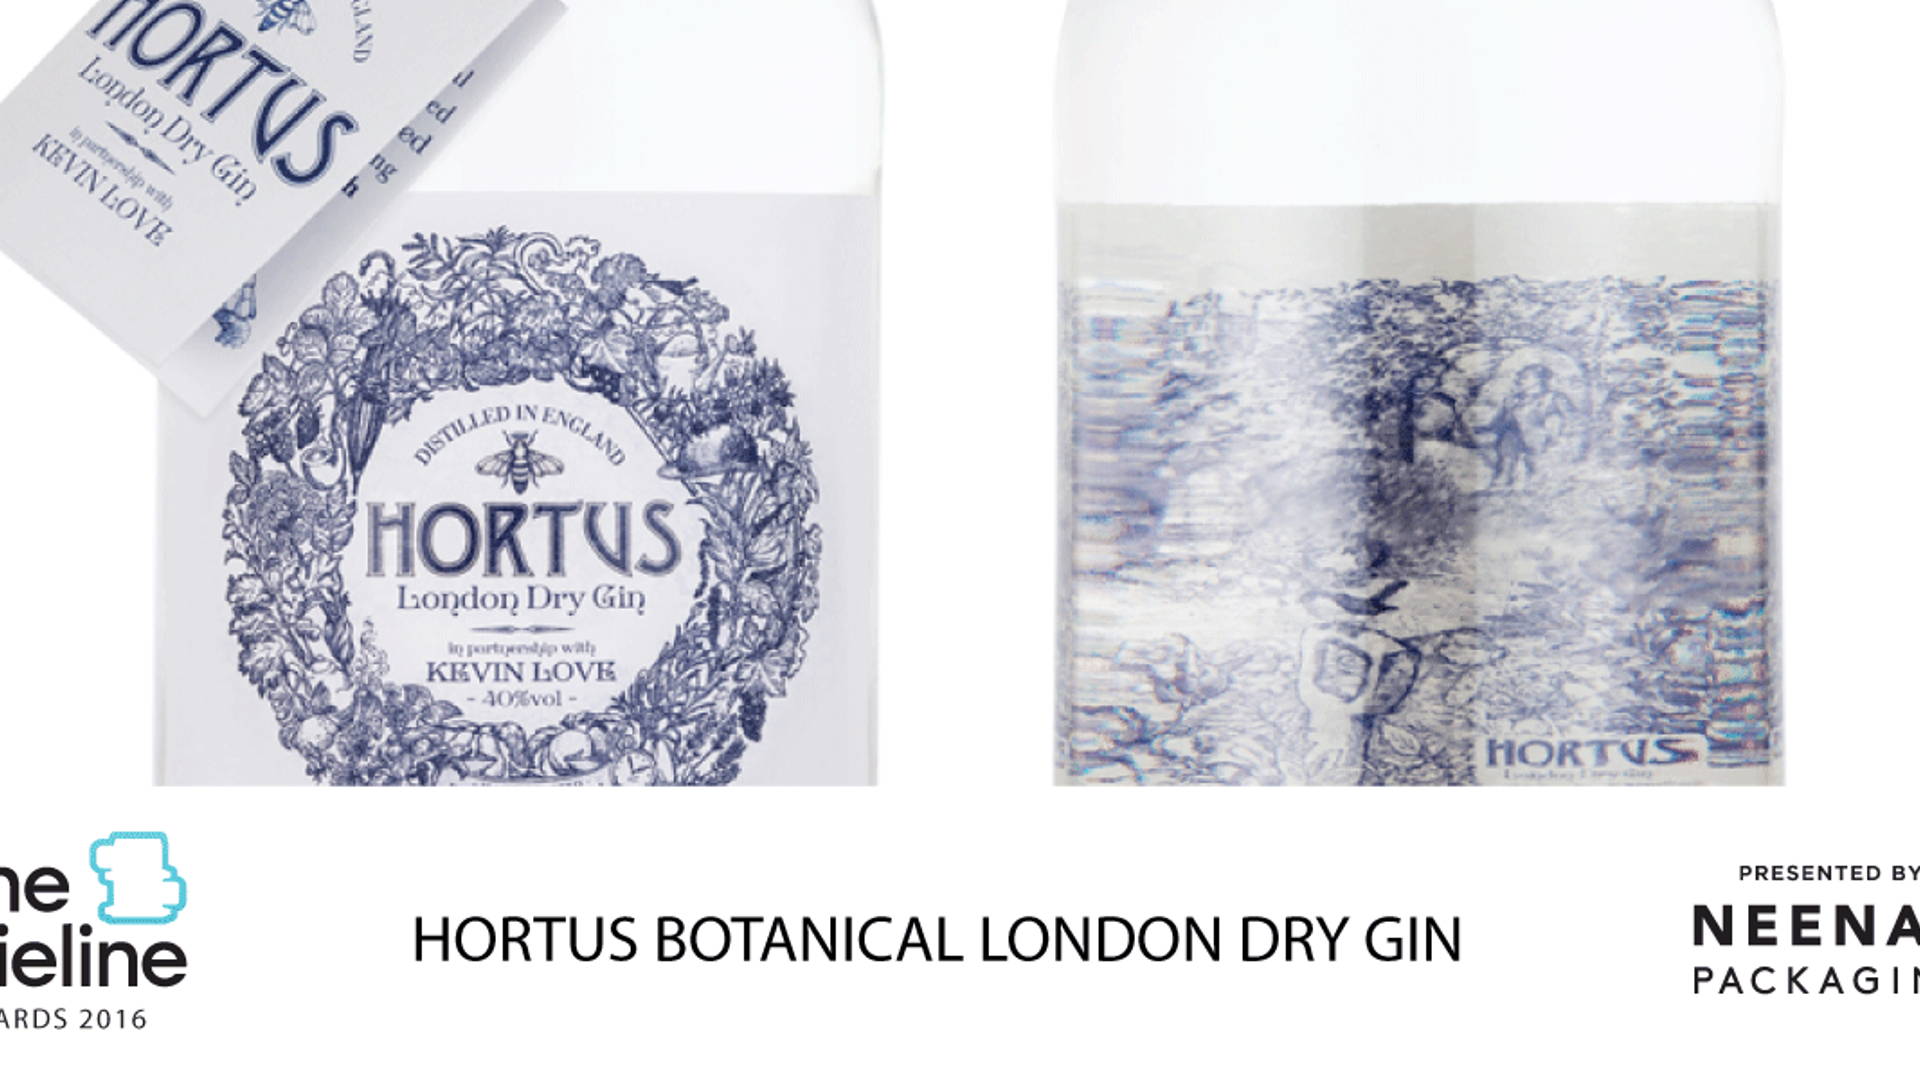 Featured image for The Dieline Awards 2016 Outstanding Achievements: HORTUS BOTANICAL LONDON DRY GIN